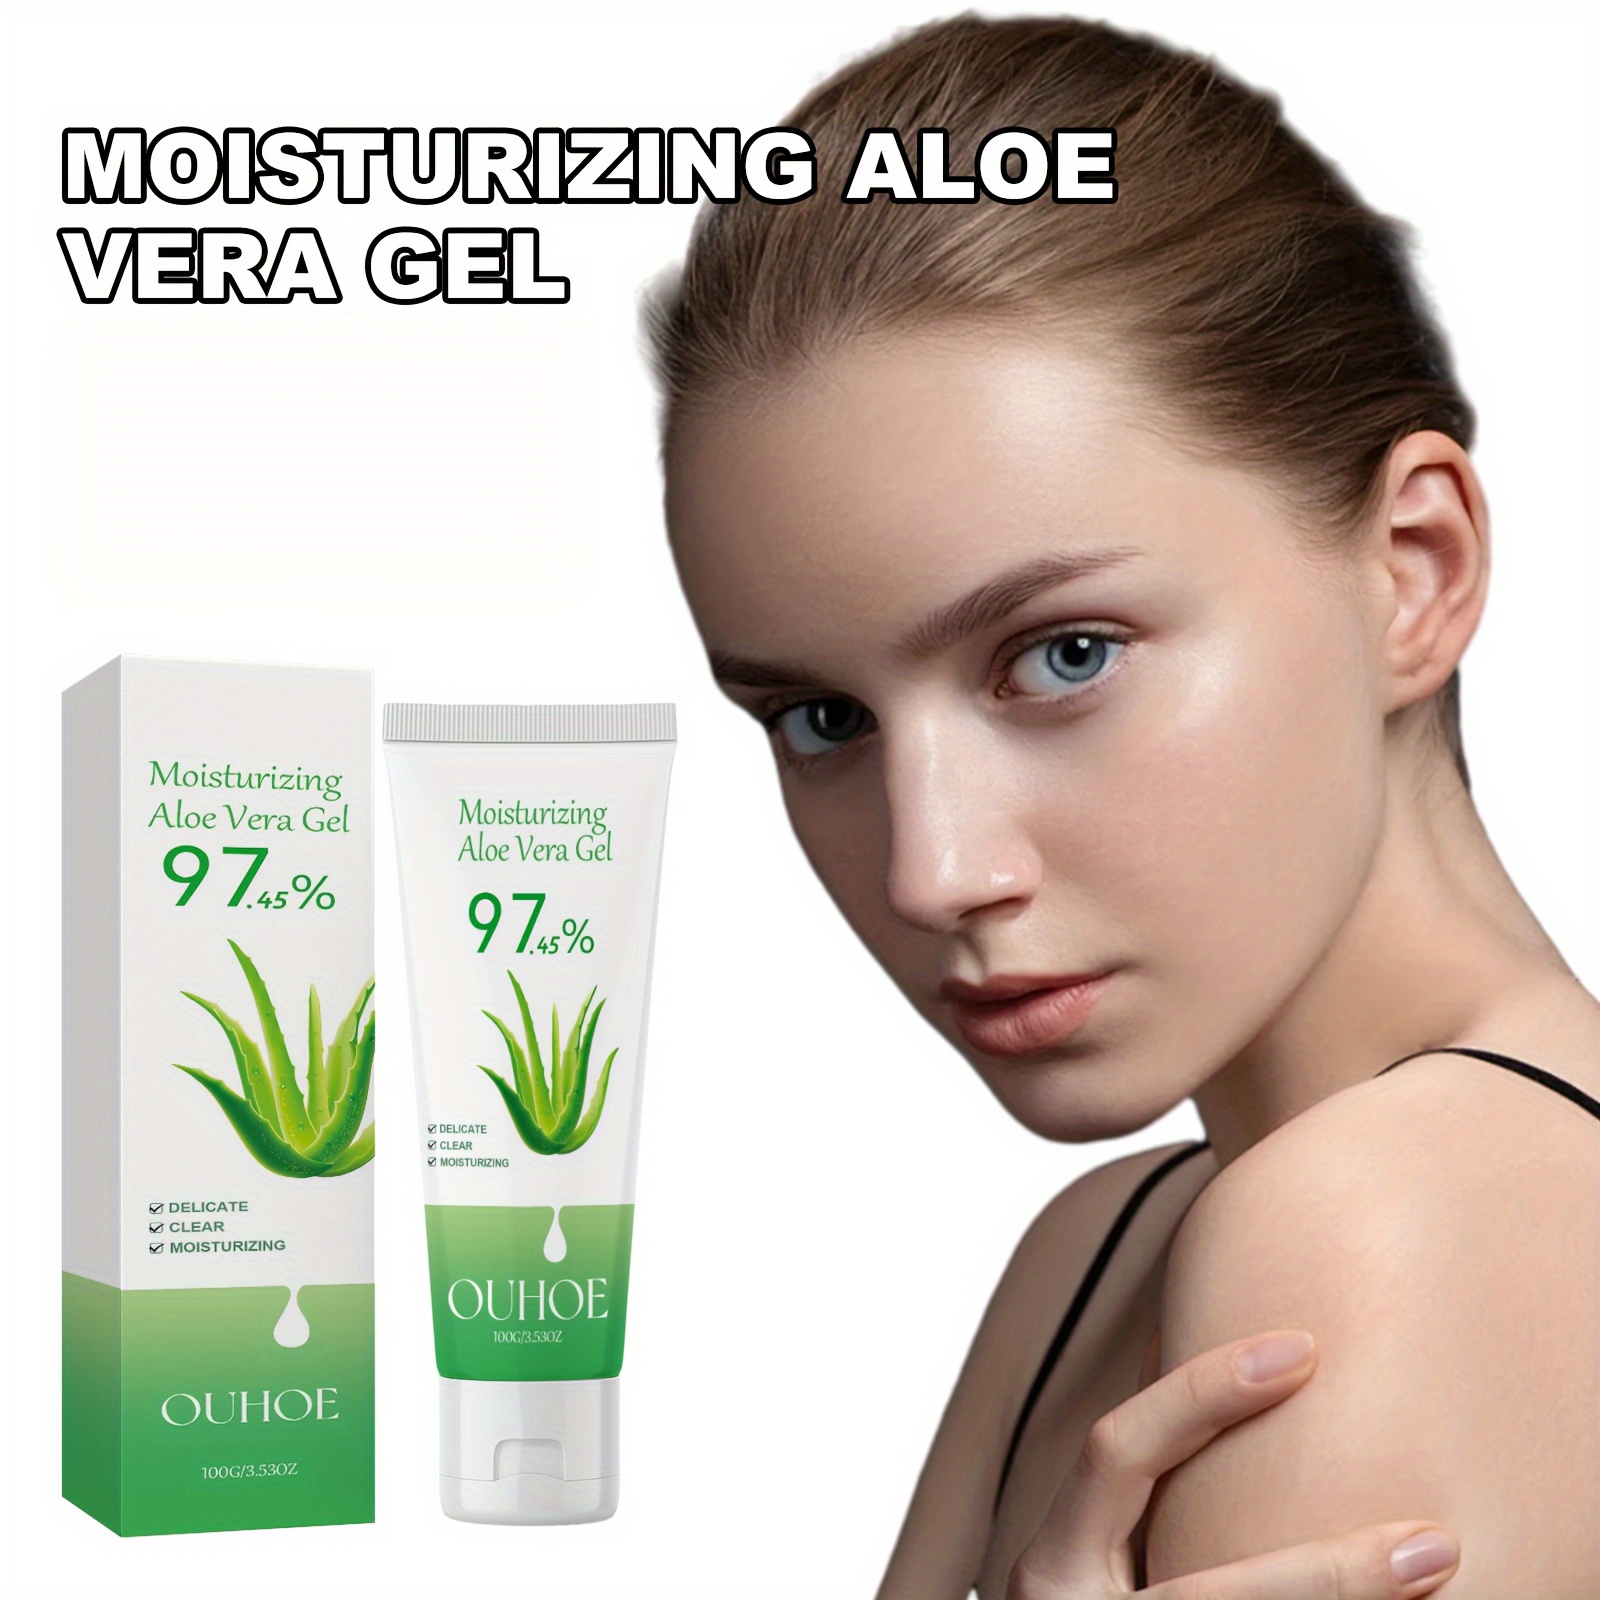 

100g Aloe Vera Moisturizing Gel - Pure, Delicate, Shiny And Moisturizing Skin - Mild And Non Irritating - Suitable For All Skin Types